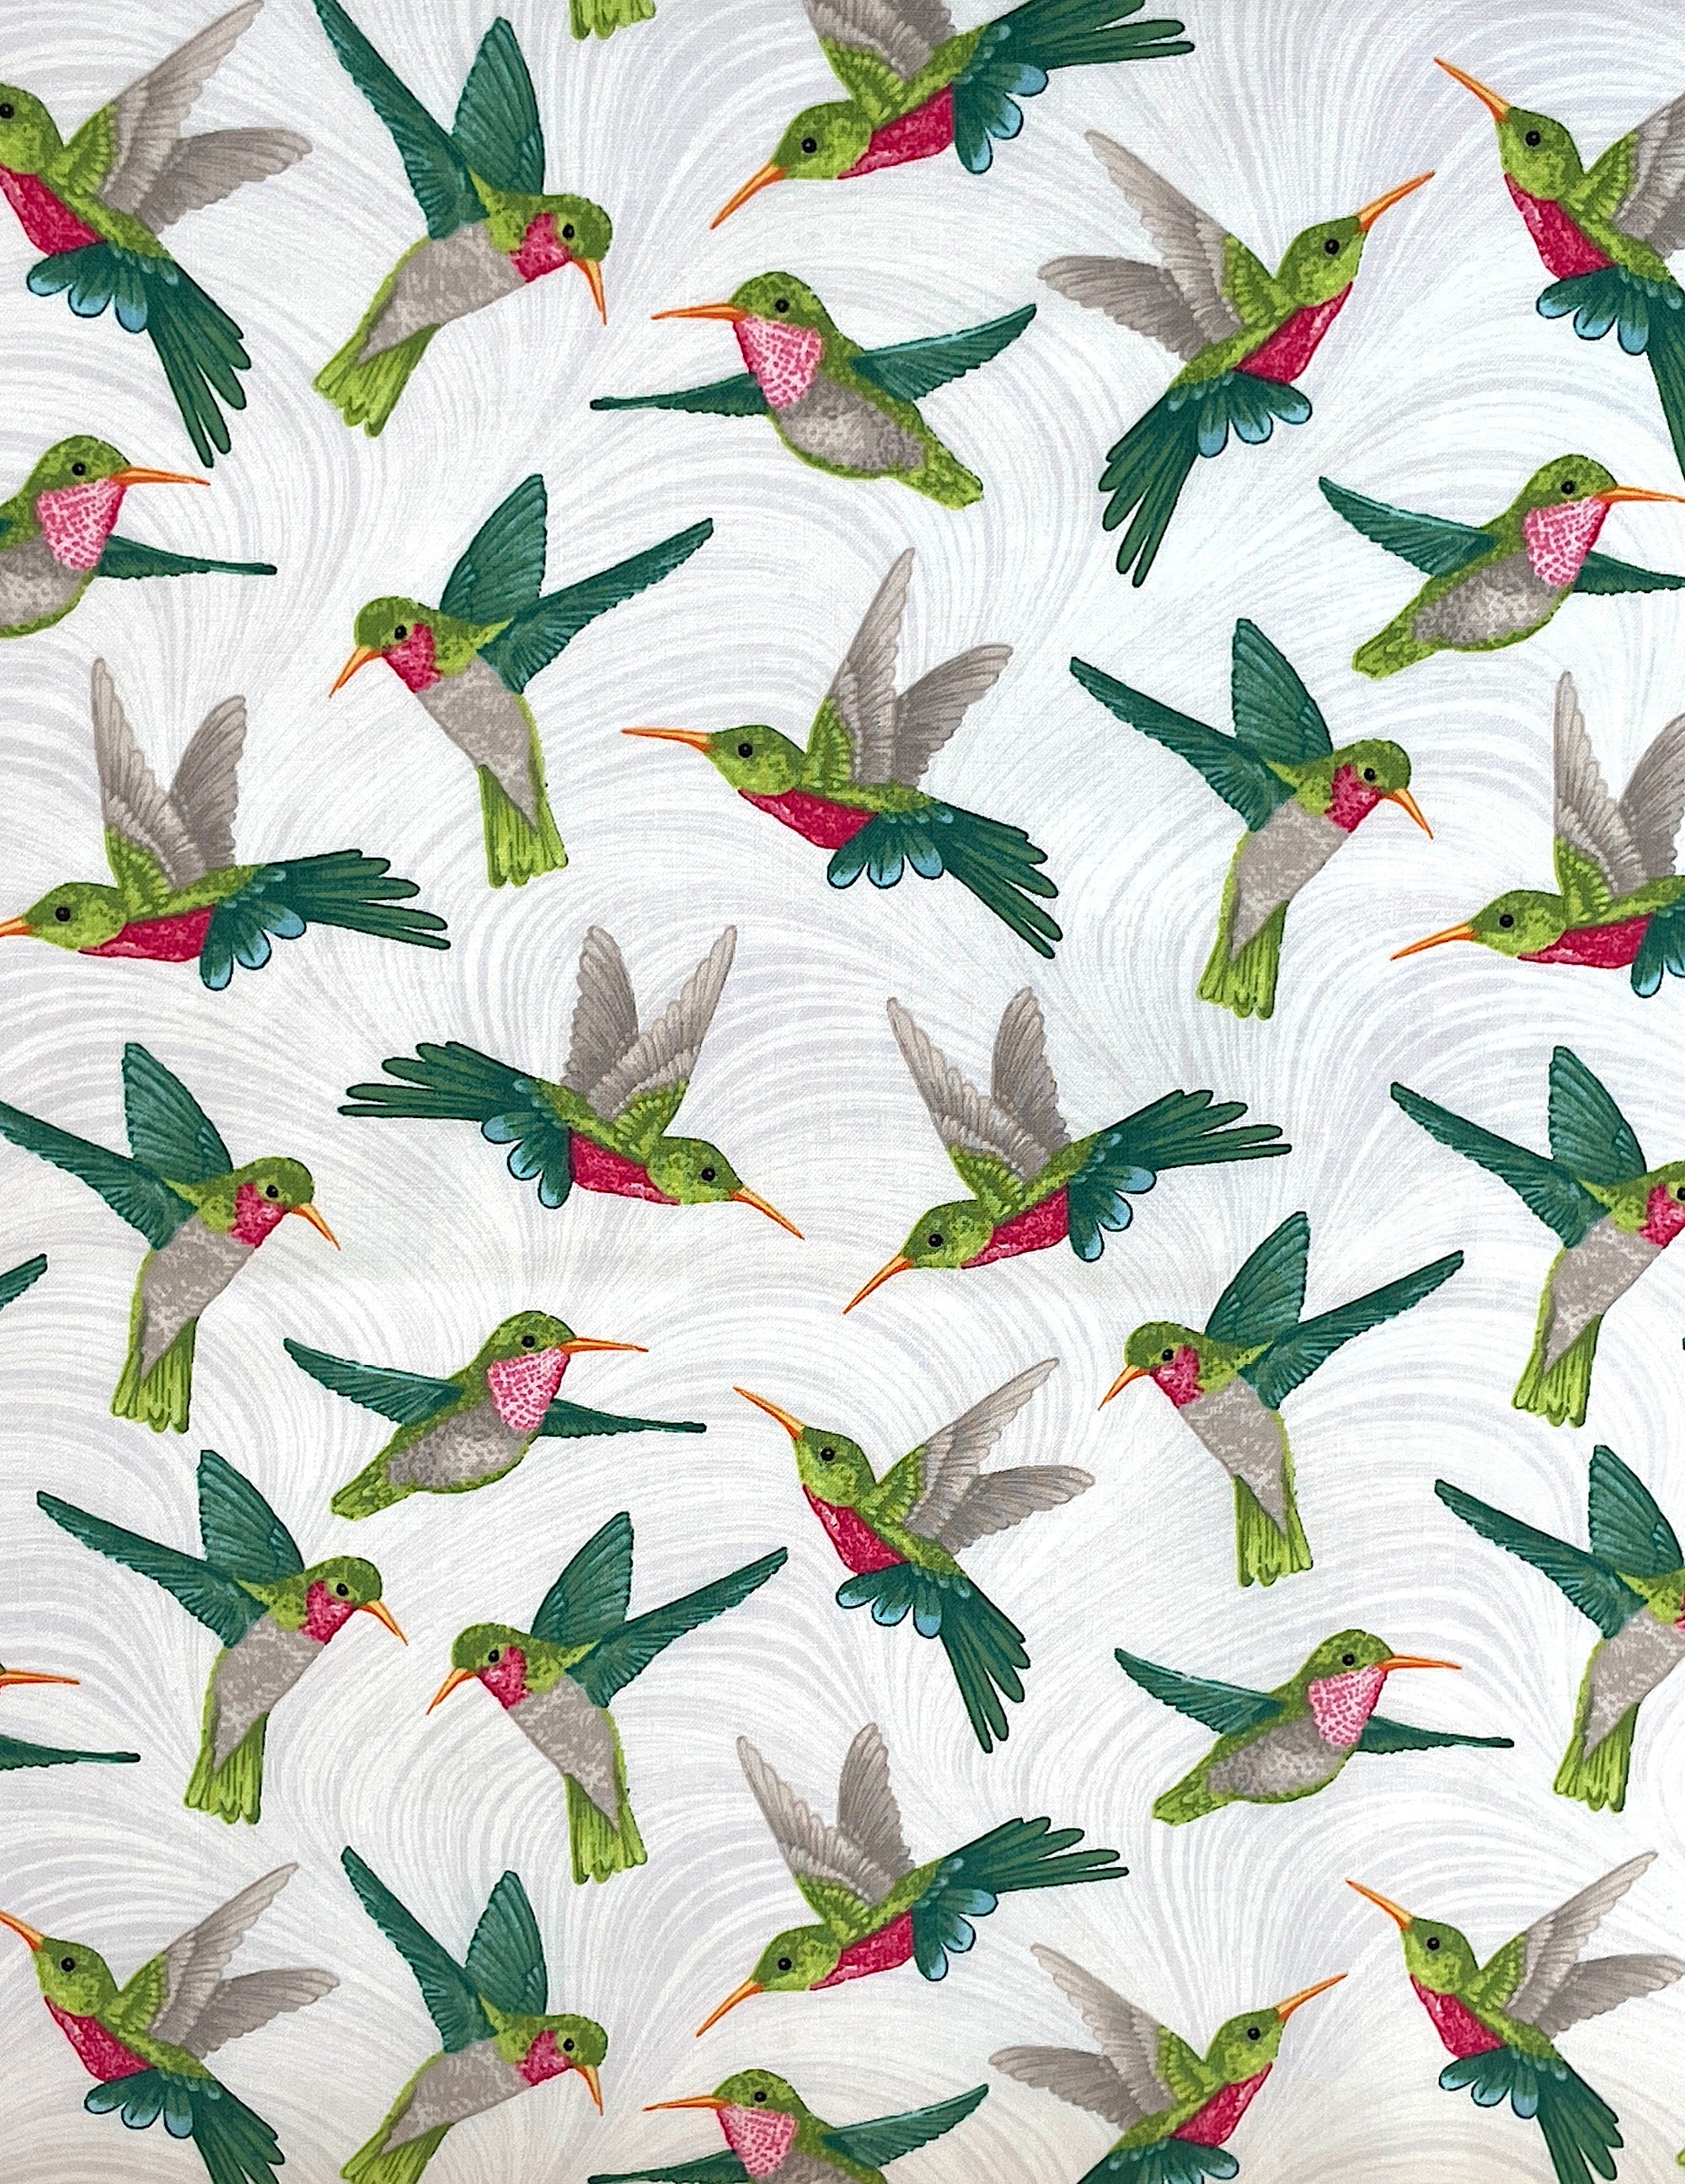 White cotton fabric covered with hummingbirds that are  green, pink and grey.